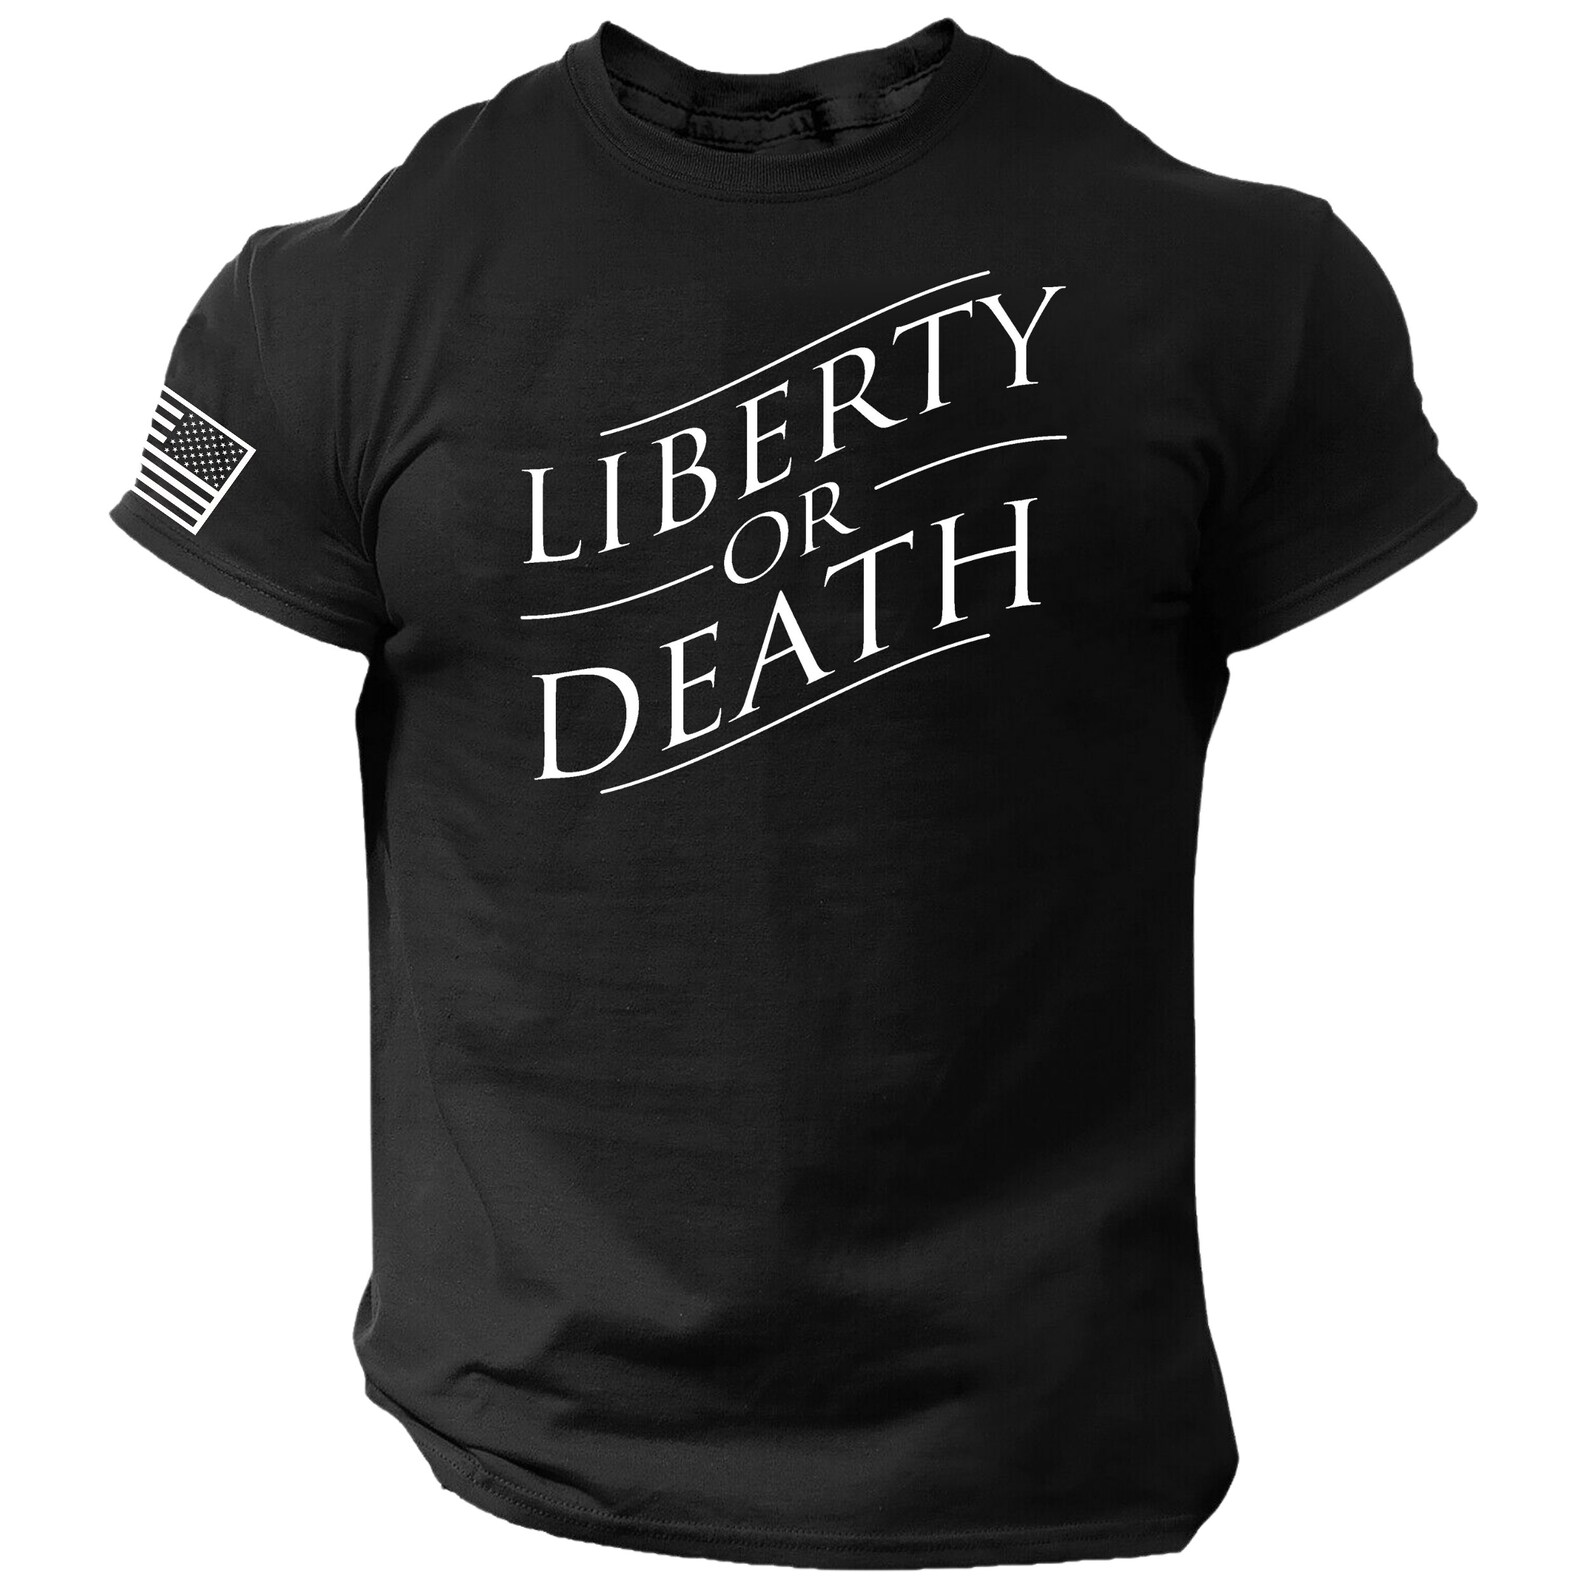 Liberty or Death T-SHIRT 1776 Freedom American Patriotic - Etsy